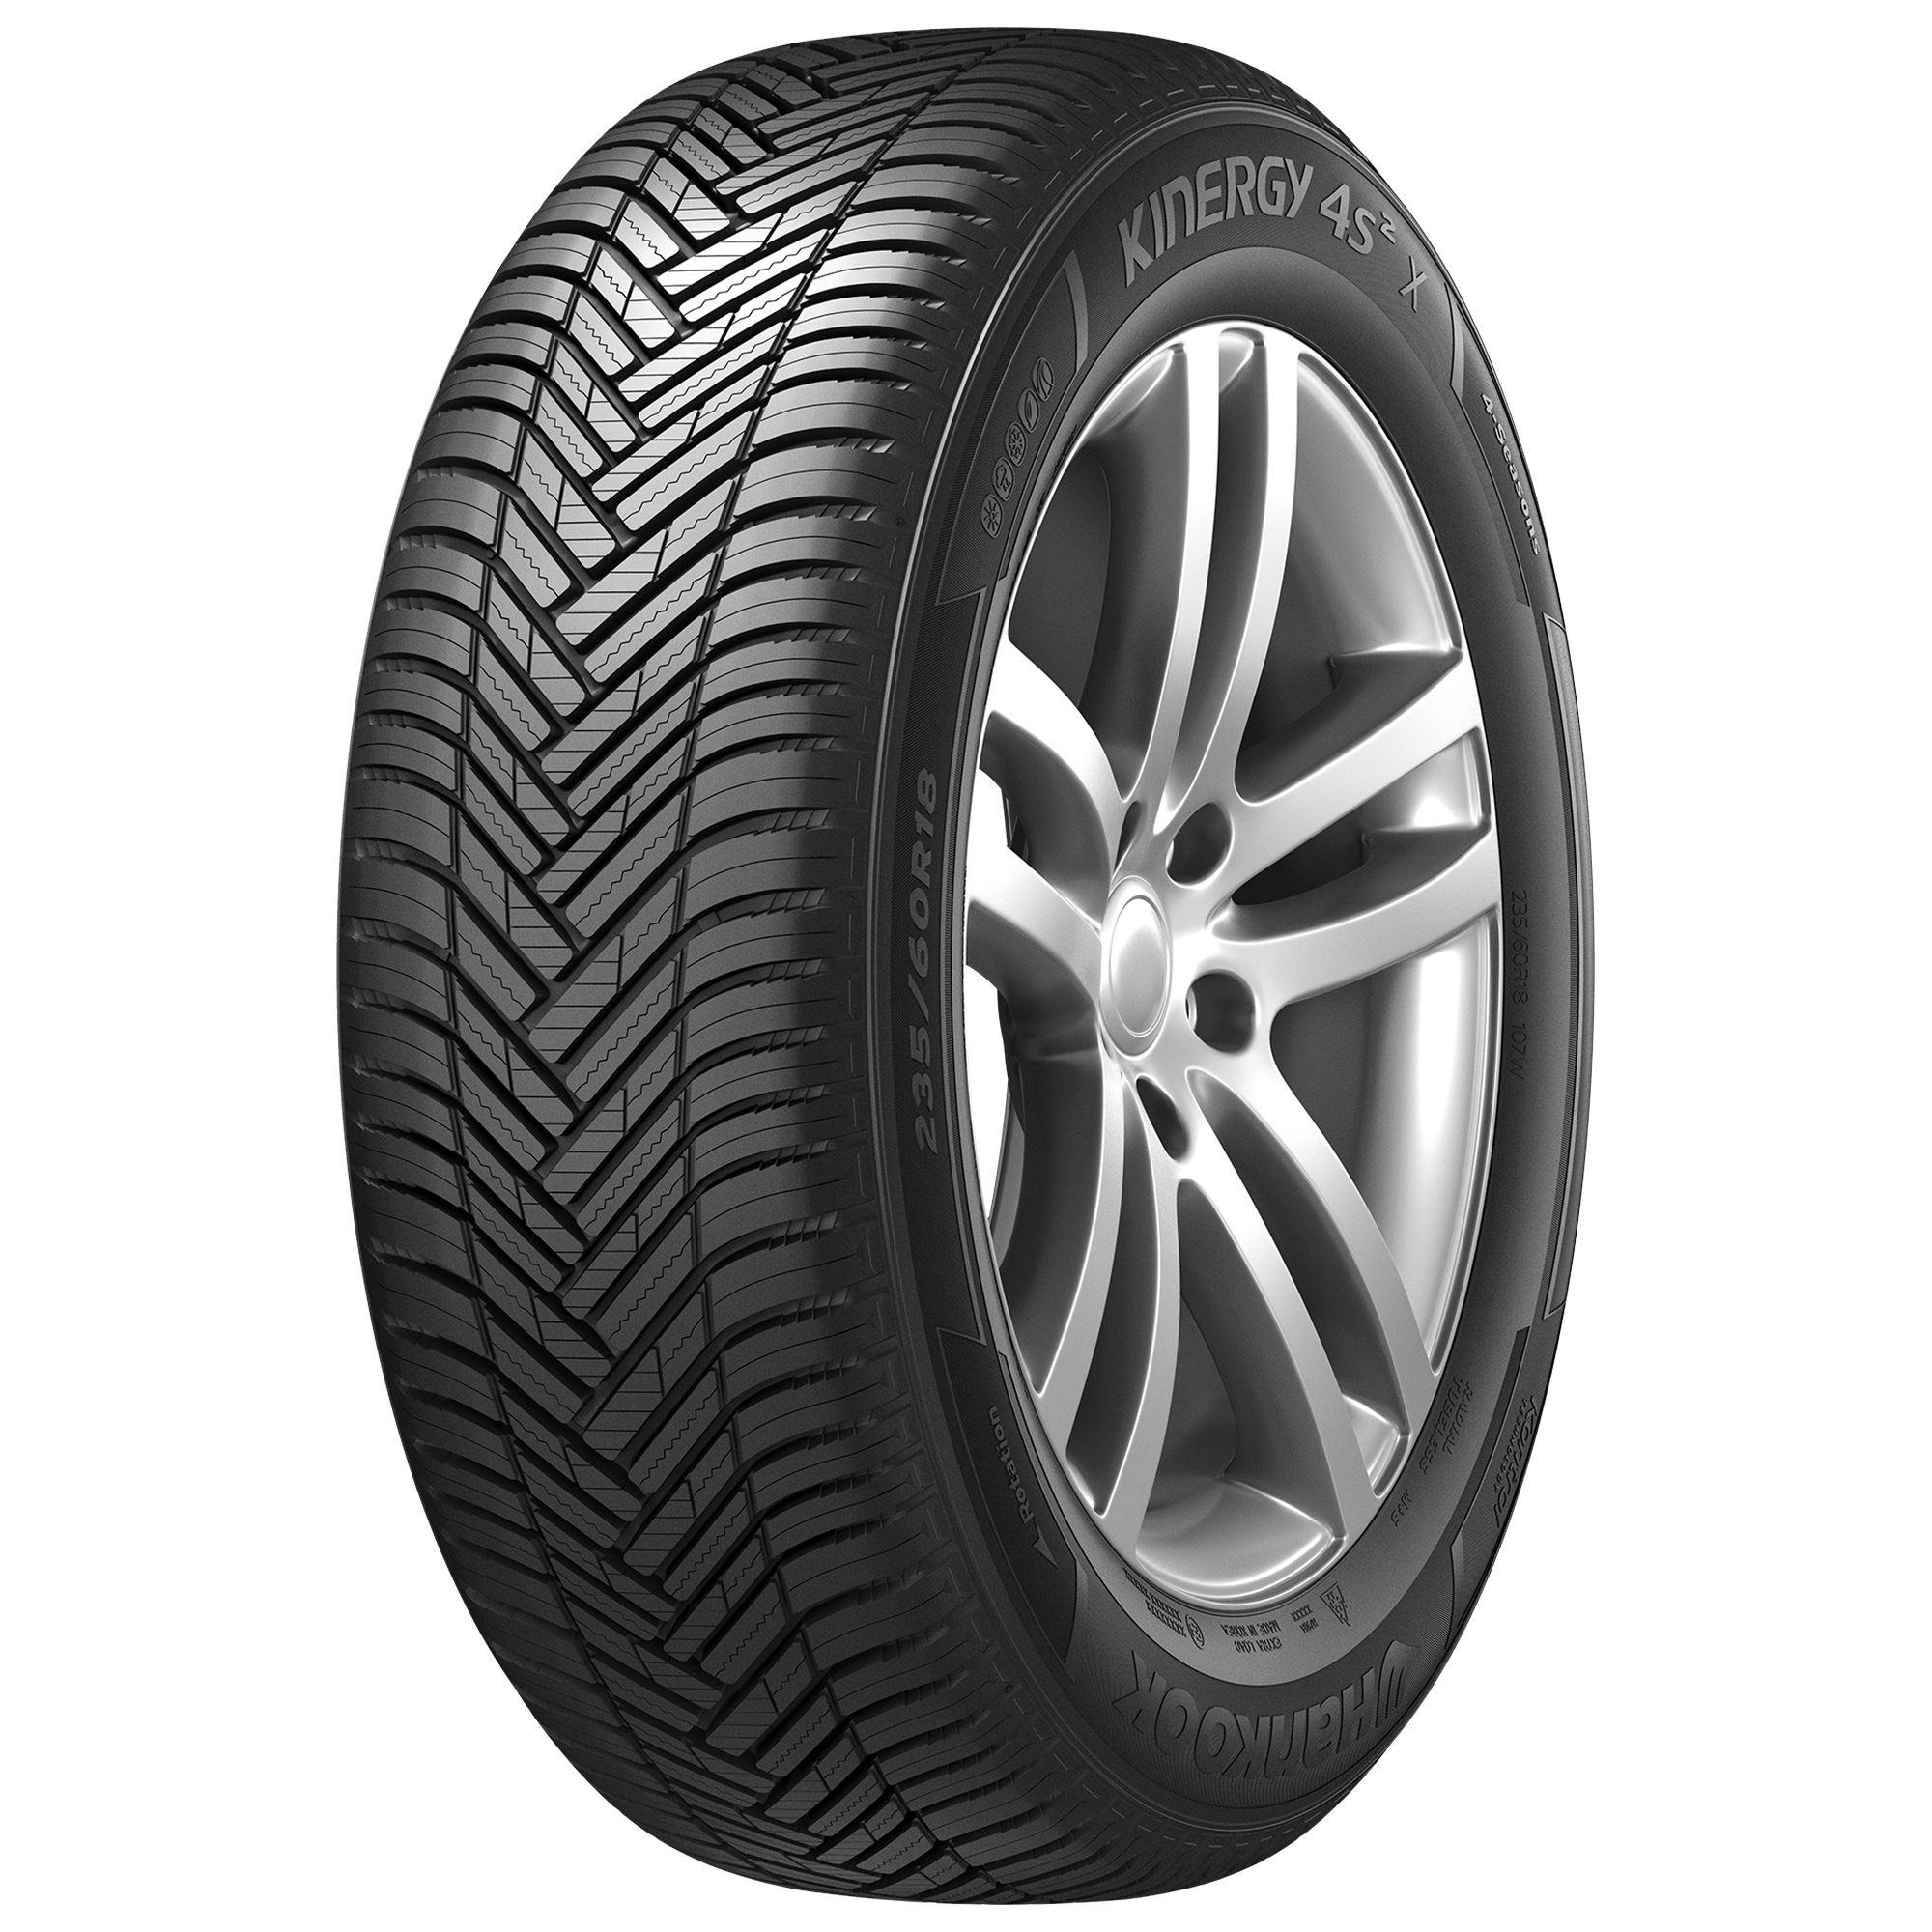 HANKOOK KINERGY 4S 2 X (H750A) 235/55R19 105W BSW